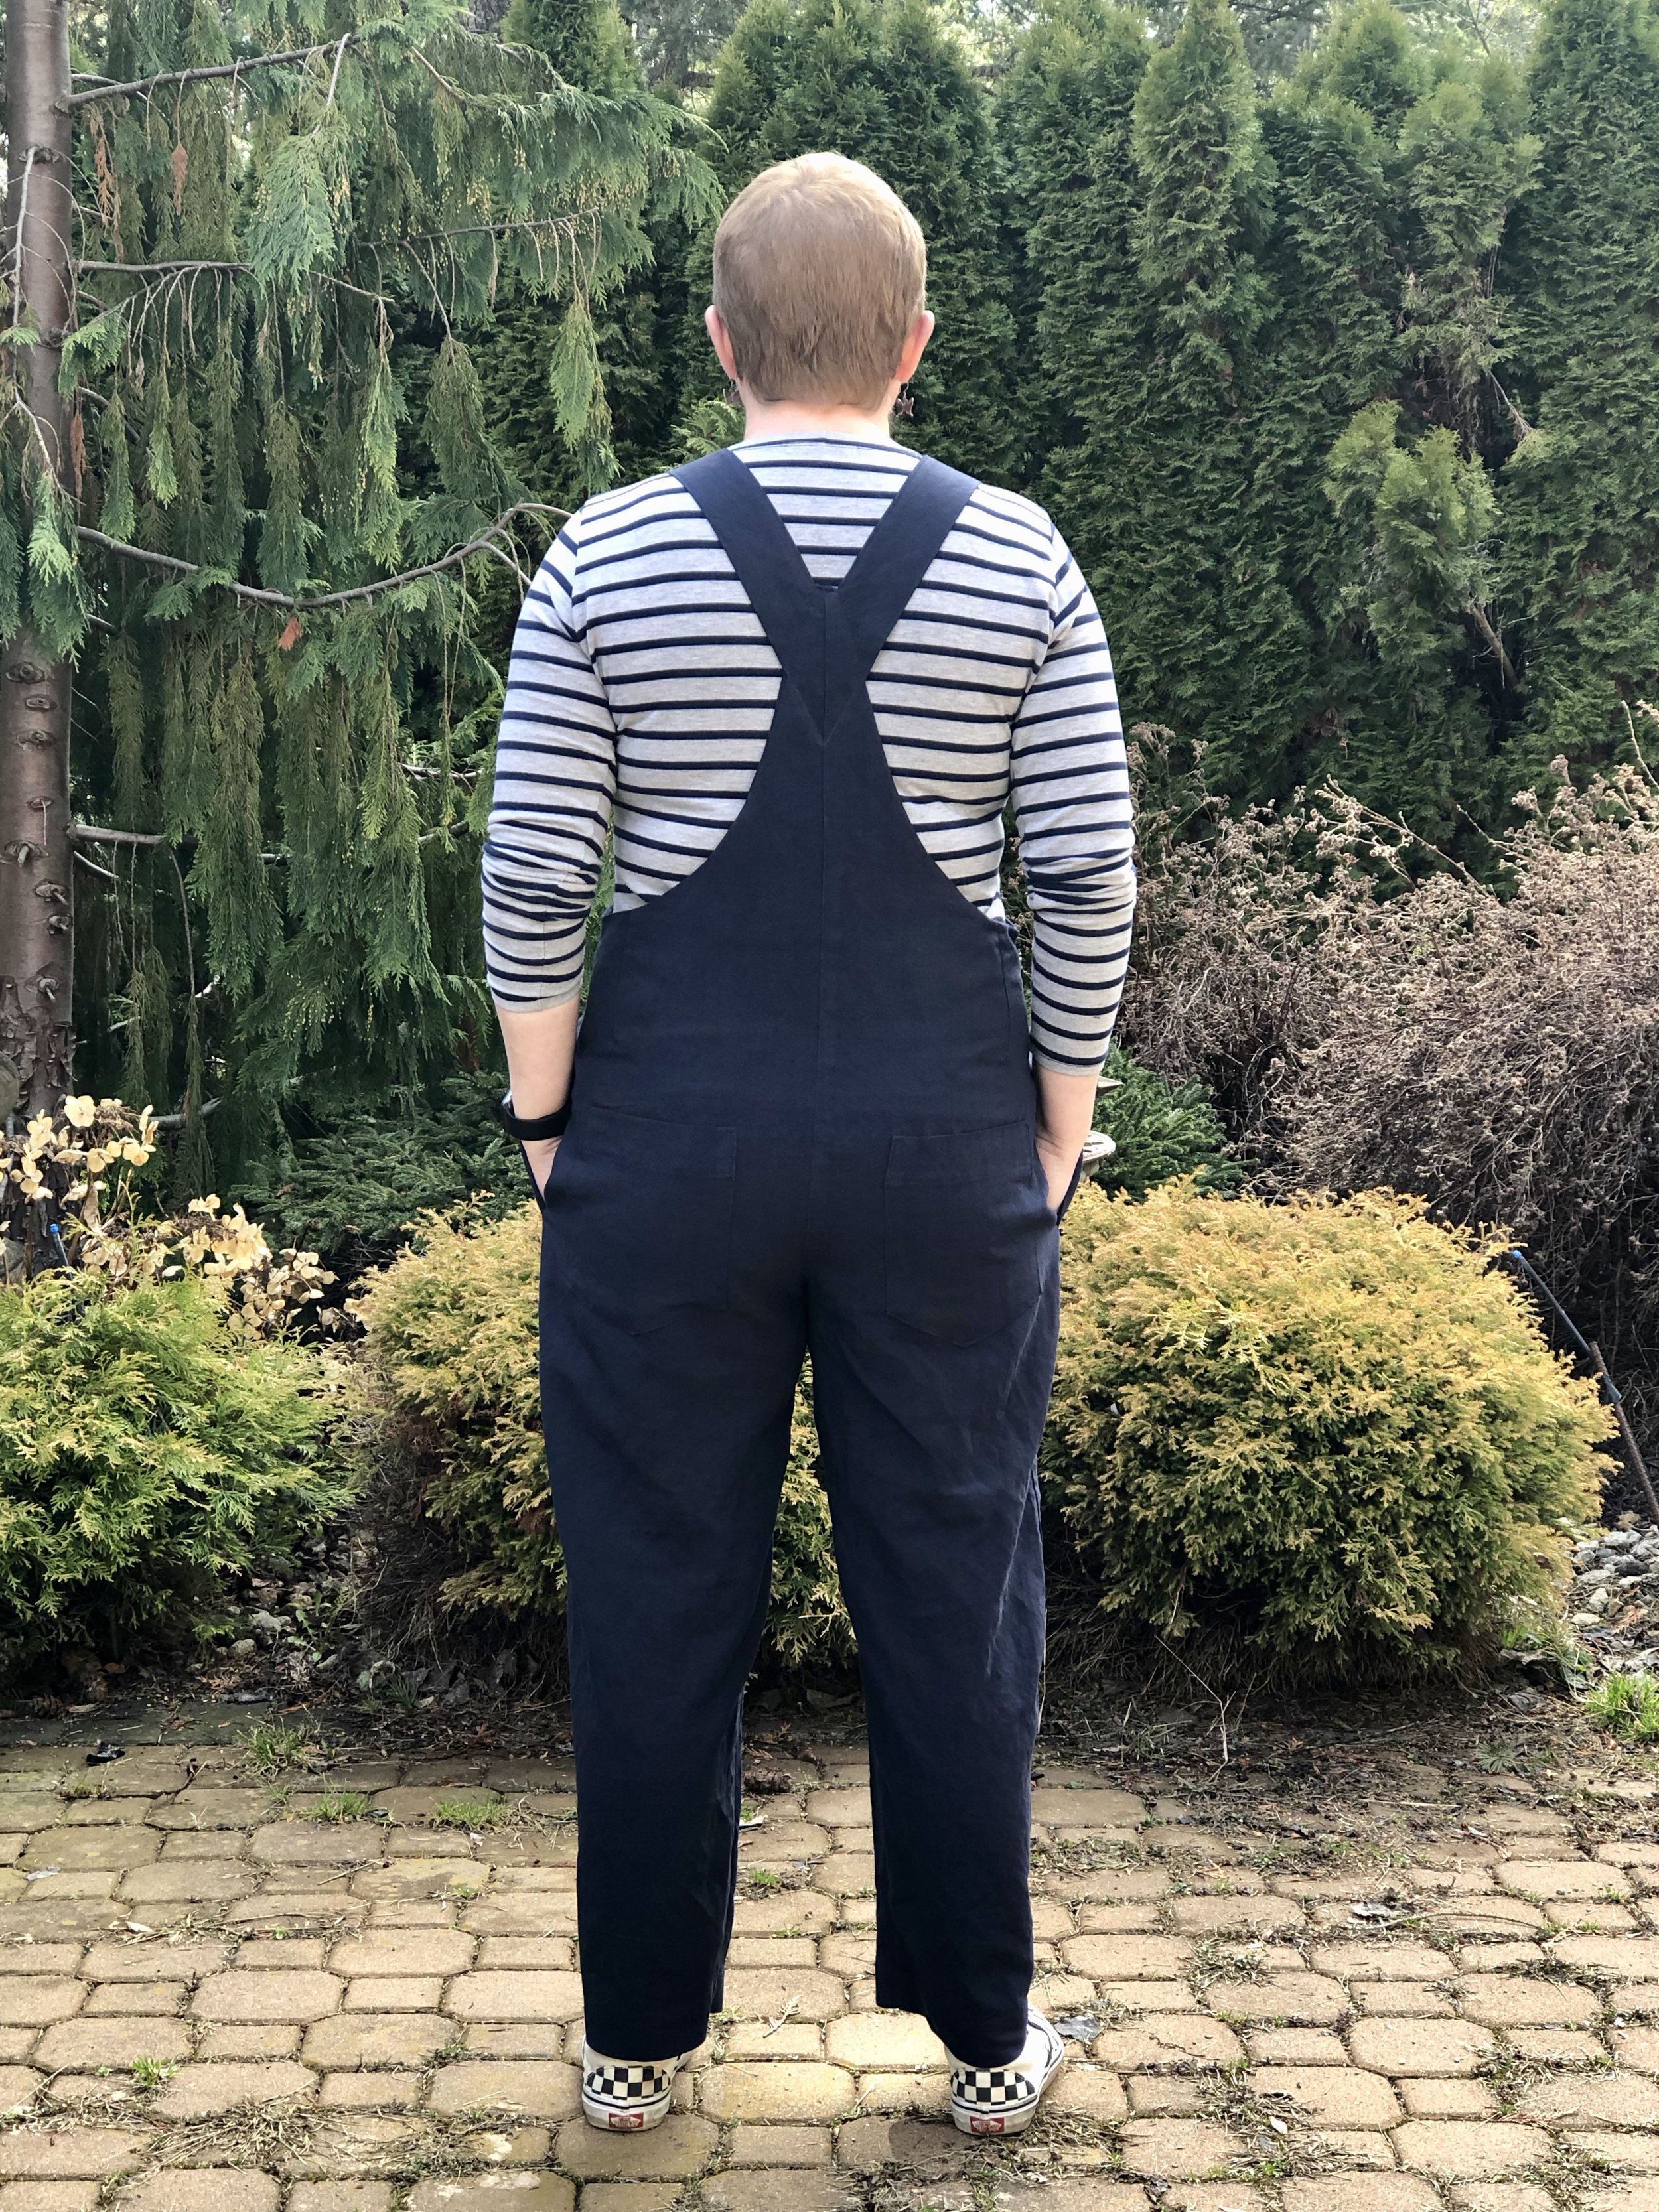 How to Add Belt Loops to the Yanta Overalls » Helen's Closet Patterns